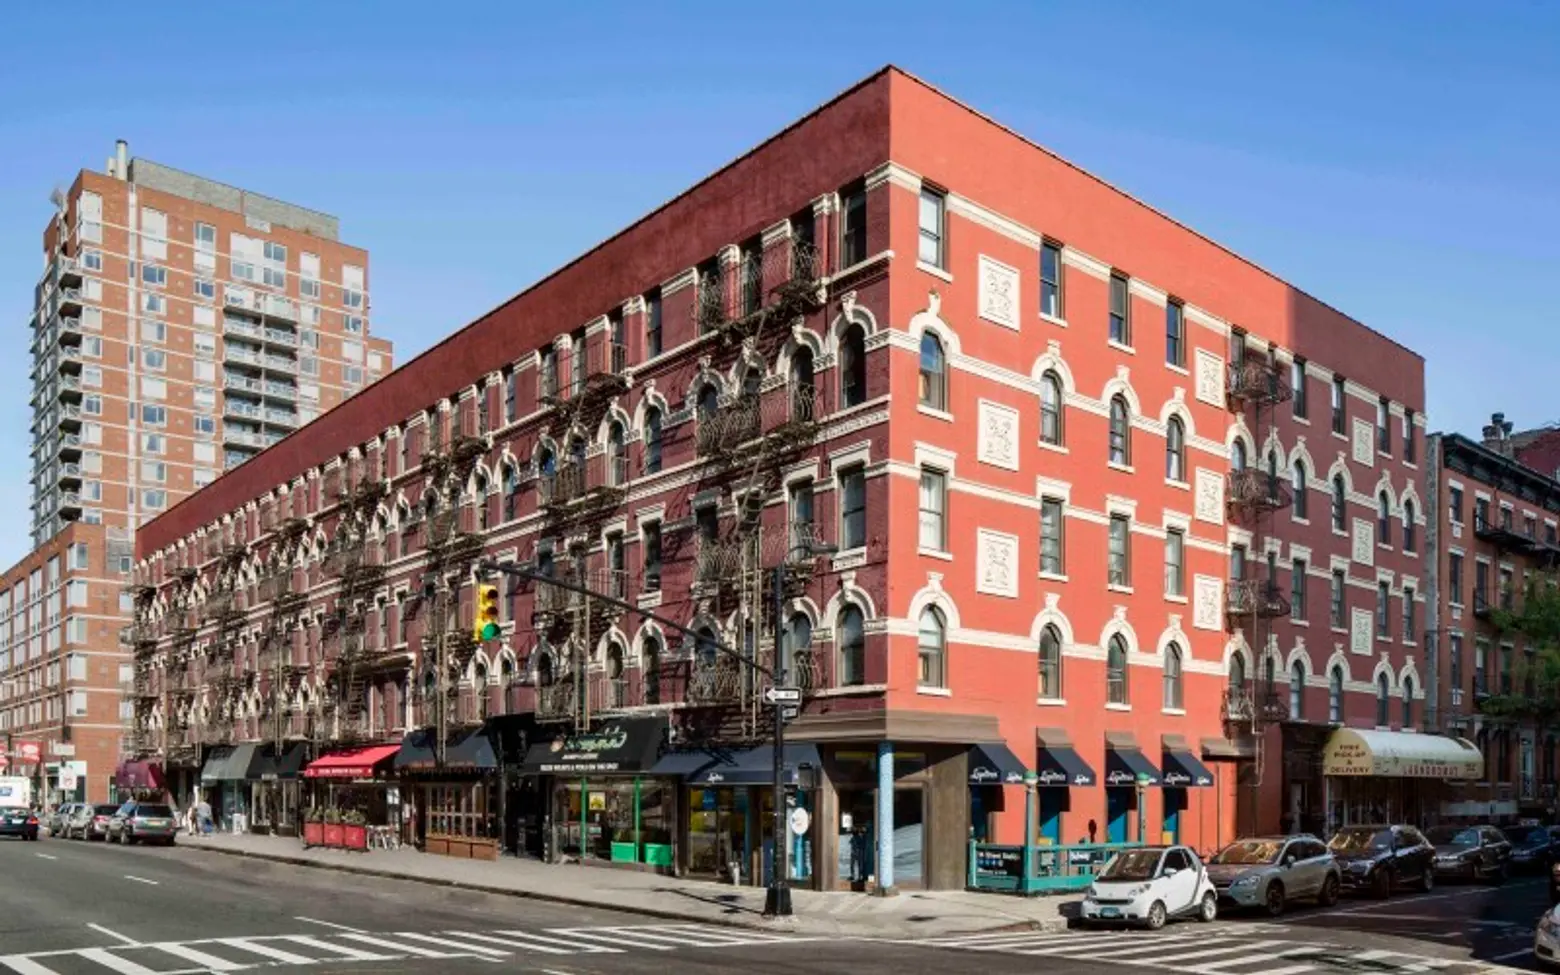 To lure Google workers, investors drop $83M on a block of Chelsea apartments